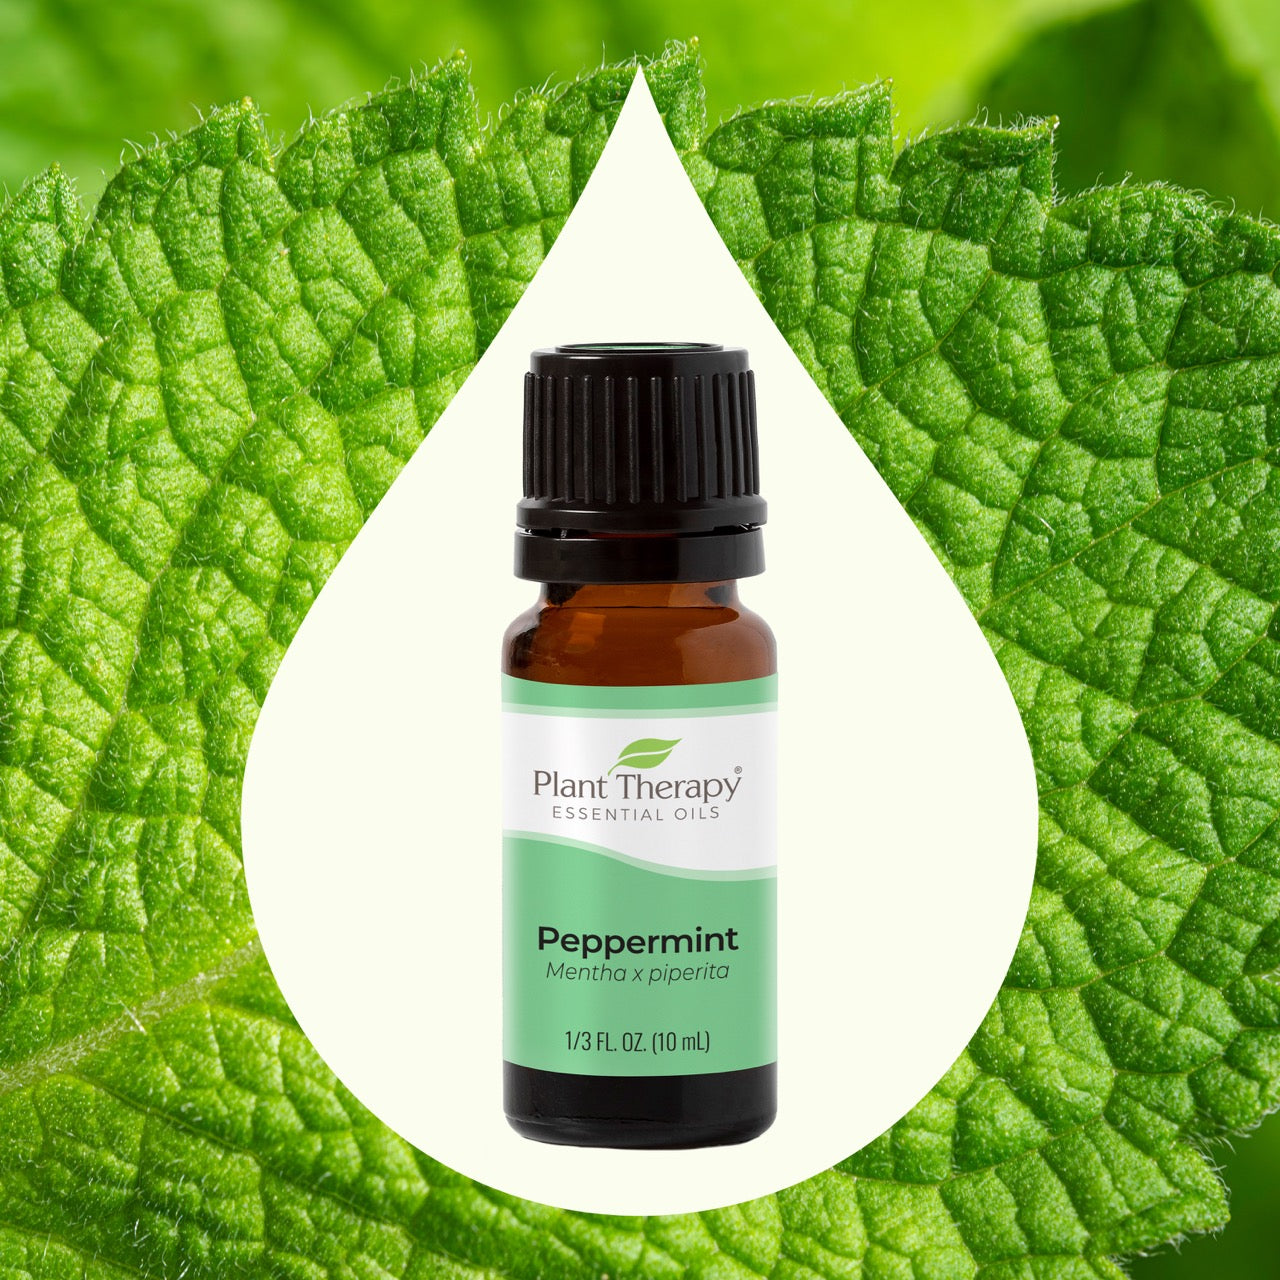 Peppermint Essential Oil ingredient image